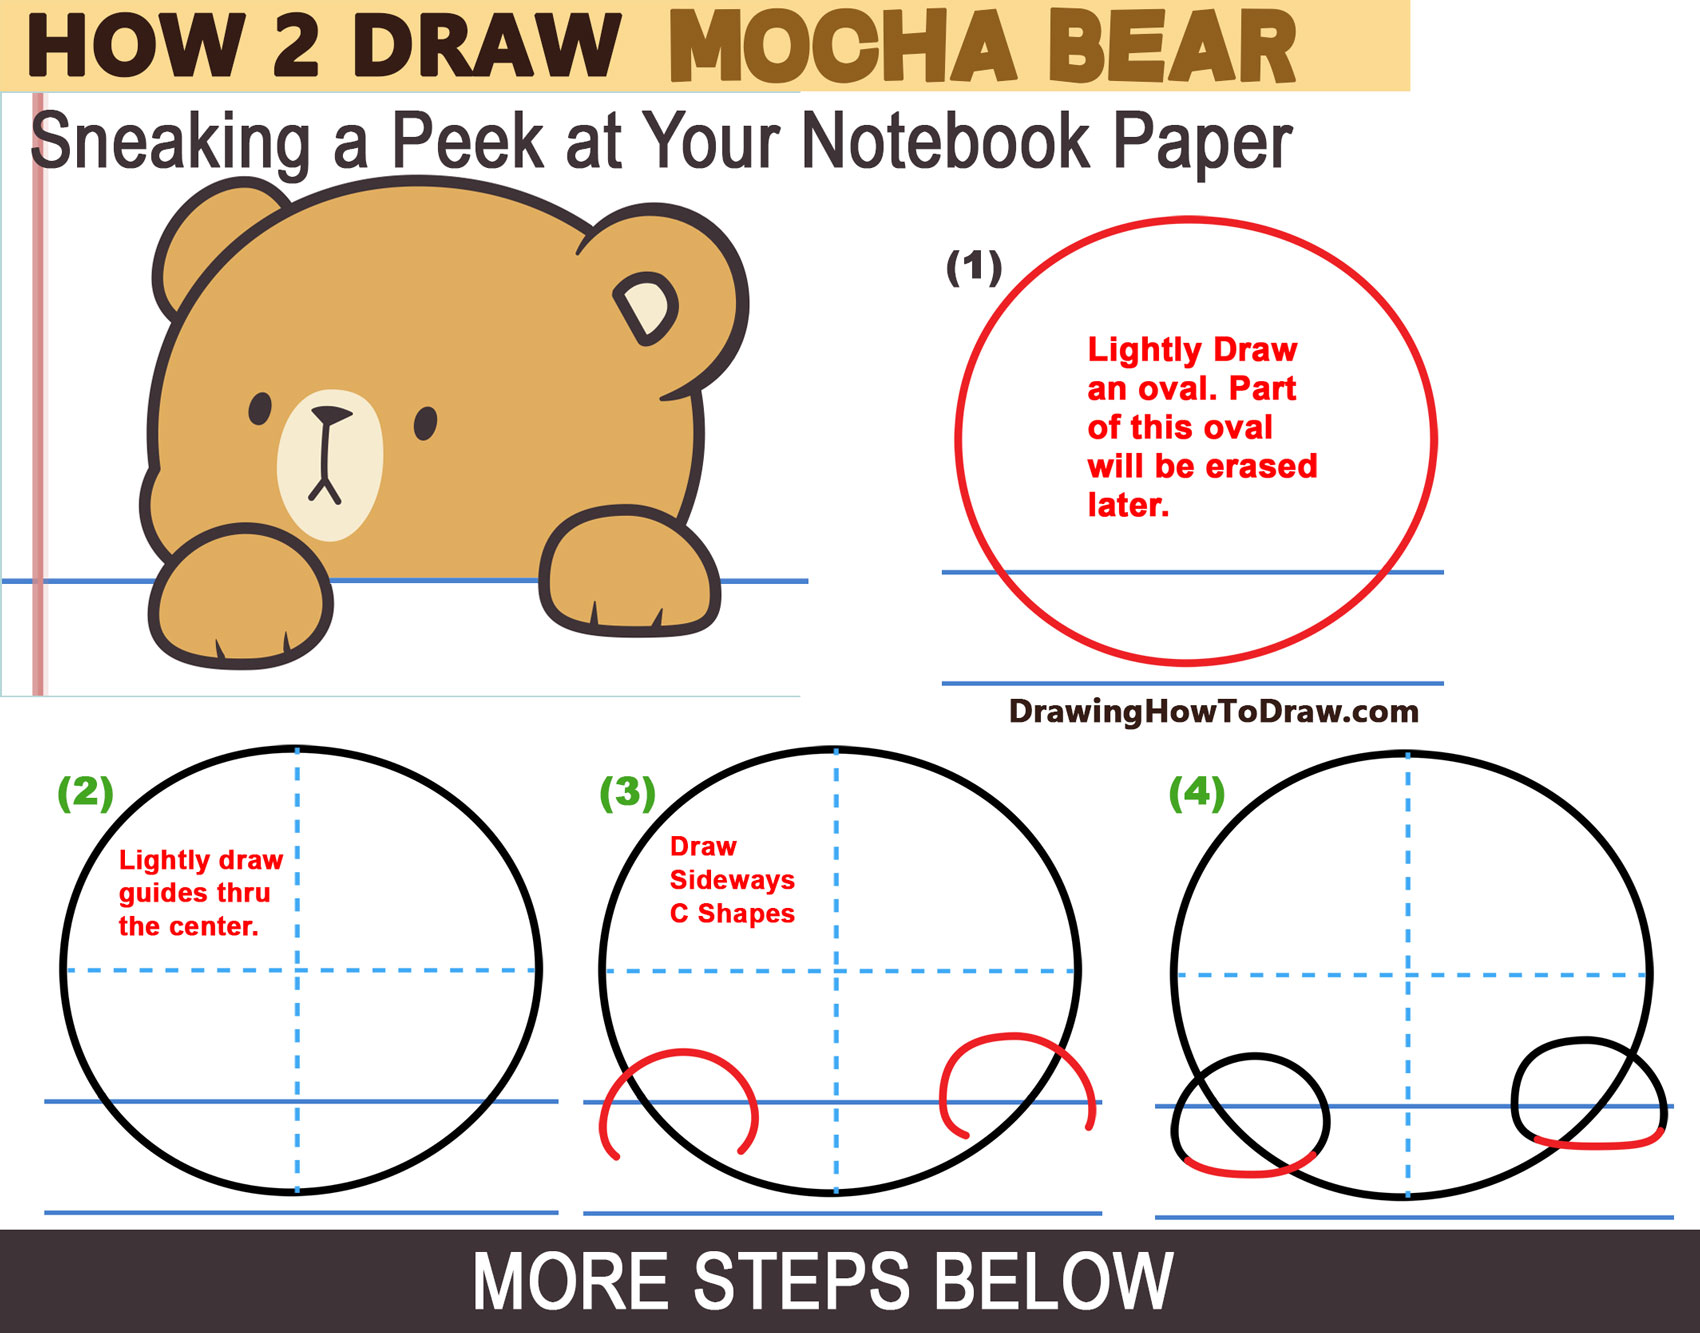 Learn How to Draw The Brown Kawaii Bear from Milk and Mocha Peering Over Lined Paper - Simple Step by Step Drawing Tutorial